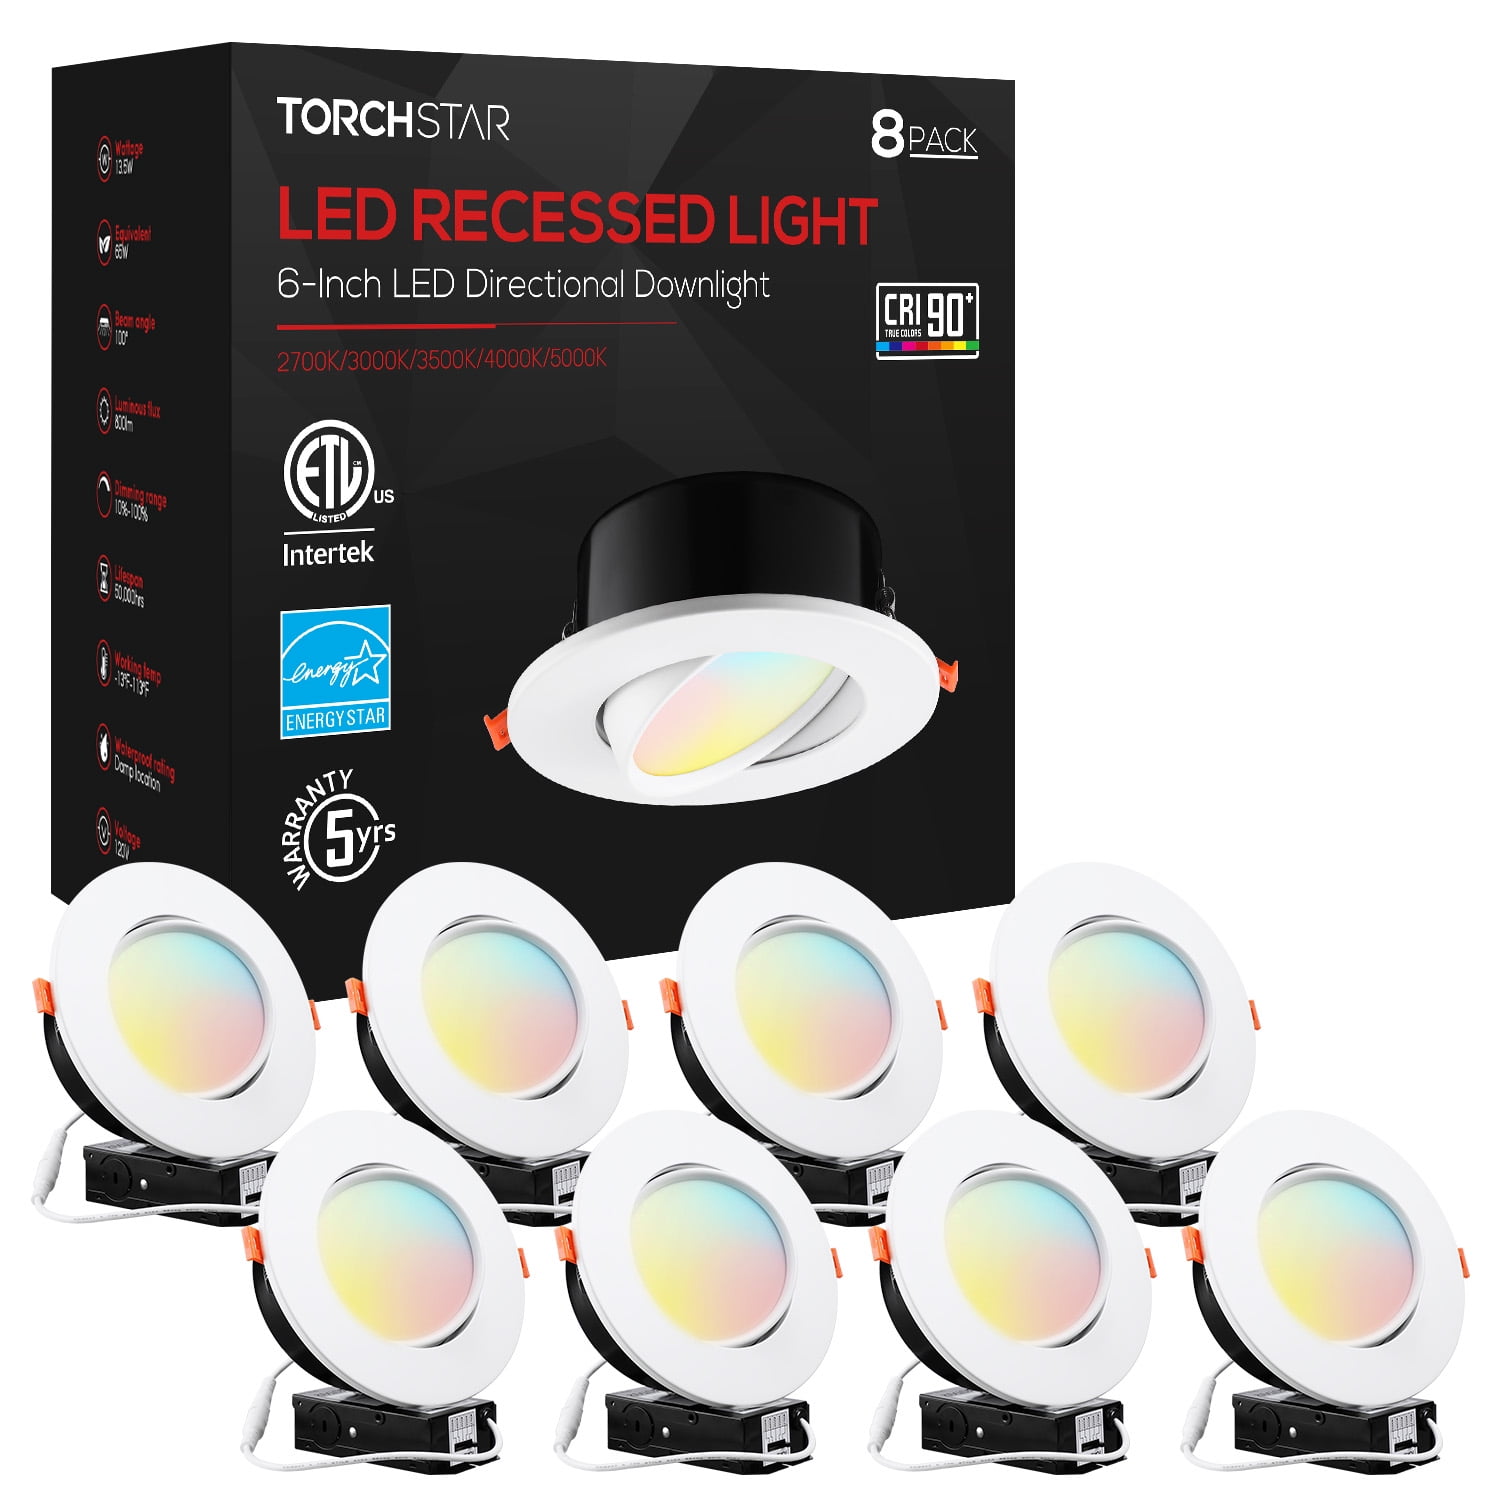 TORCHSTAR Essential Series 12-Pack 13.5W Inch Slim LED Panel Downlight  with J-Box, Dimmable 1000lm Ultra-Thin LED Recessed Light, ETL  Energy  Star Listed, 4000K Cool White